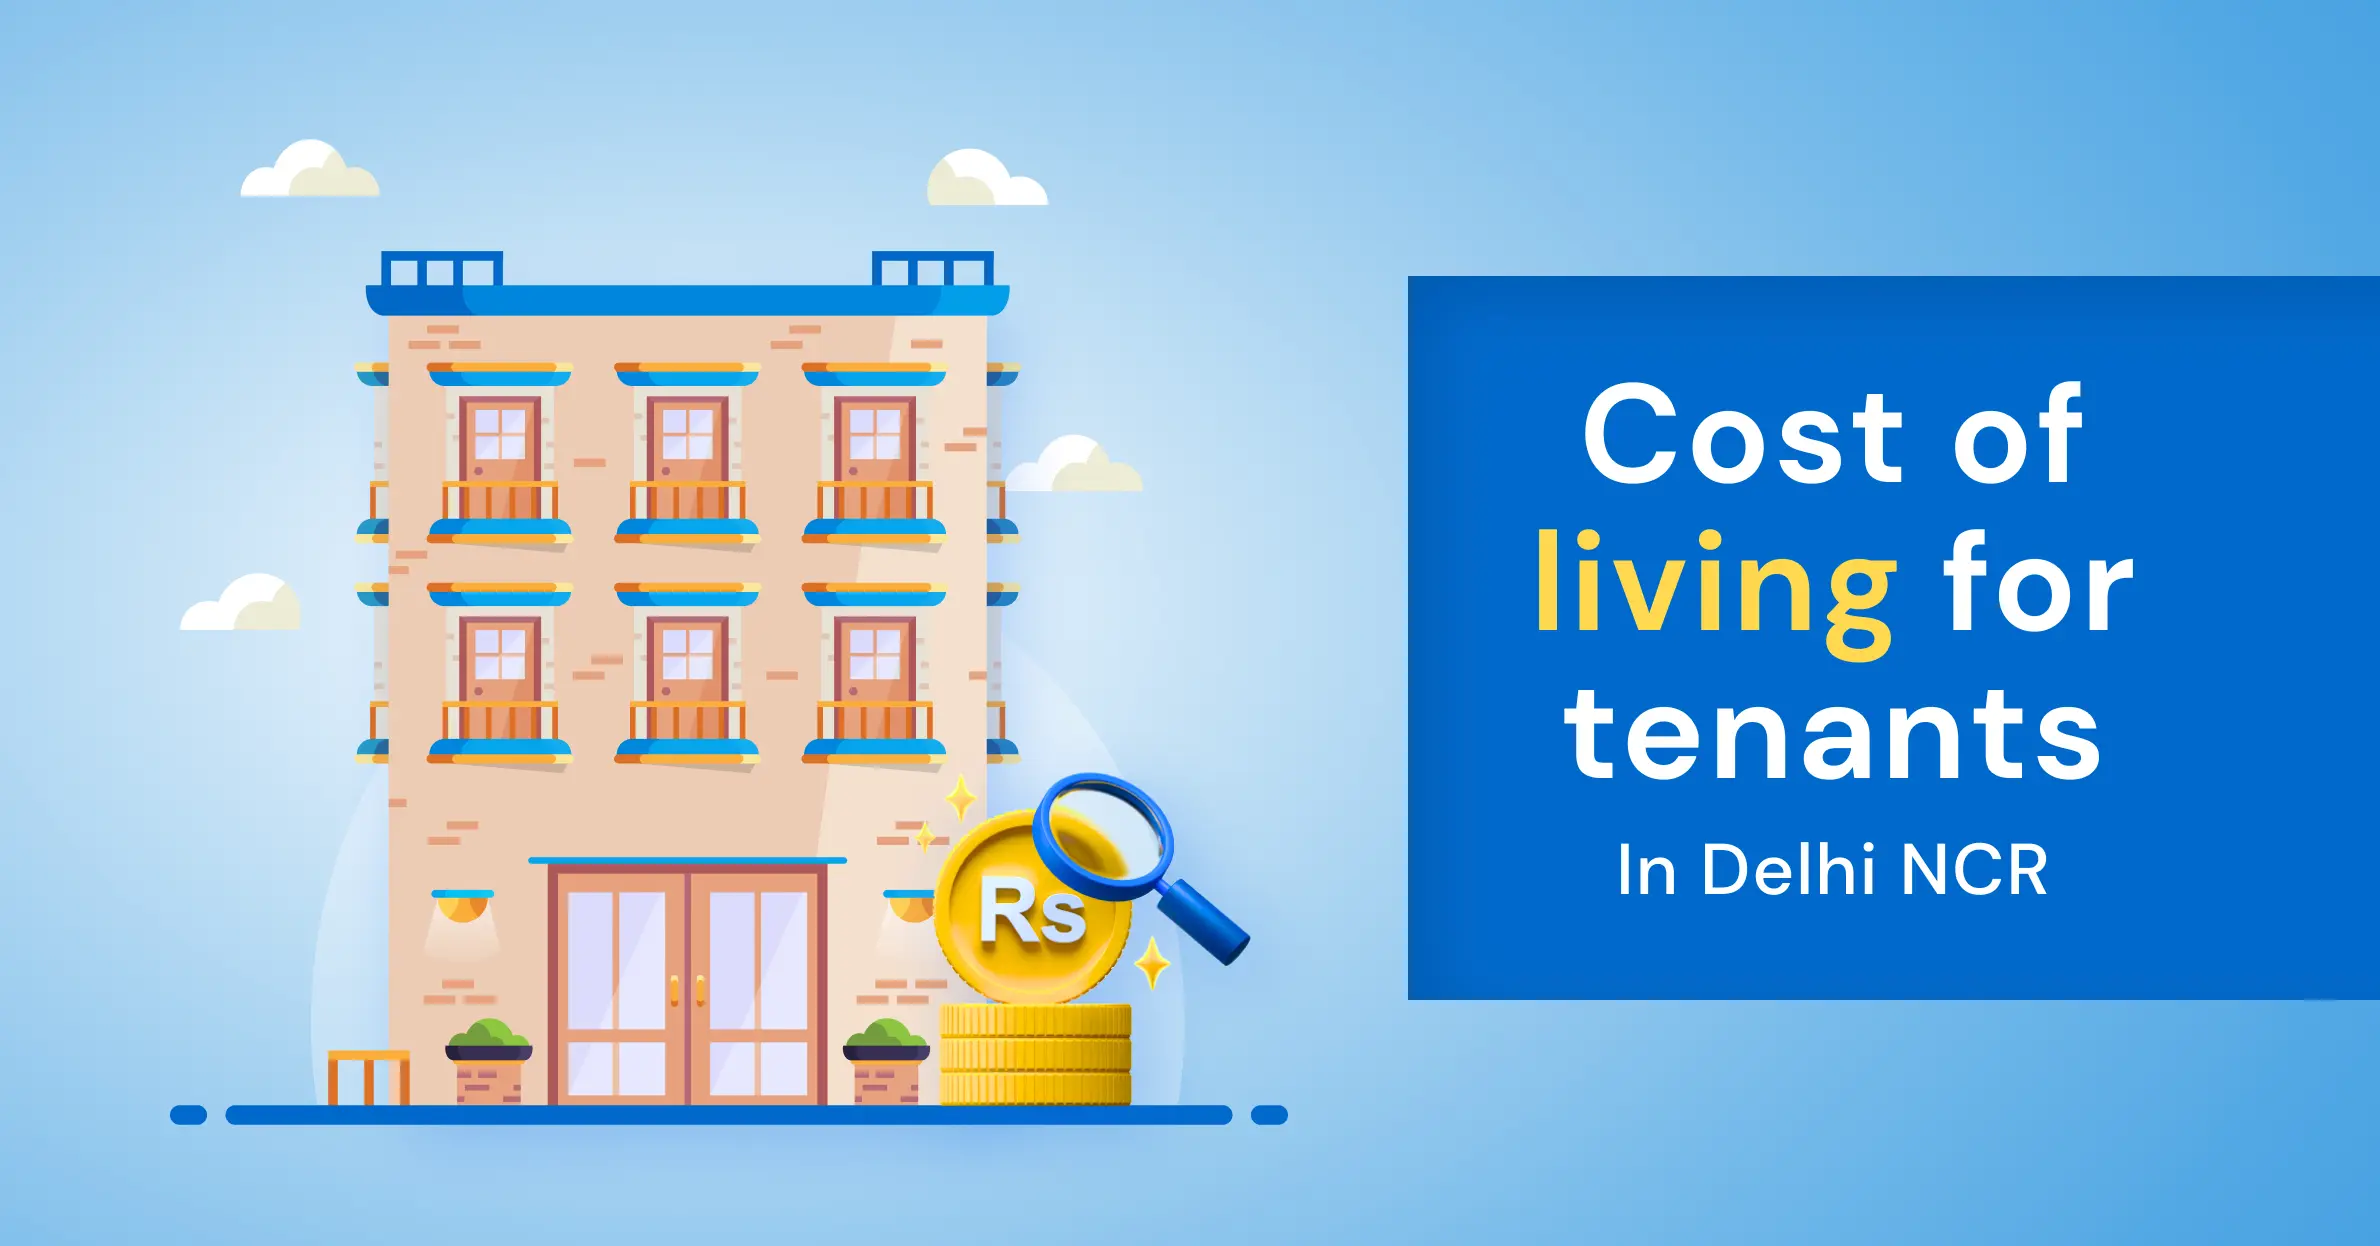 Cost of living for tenants in Delhi NCR